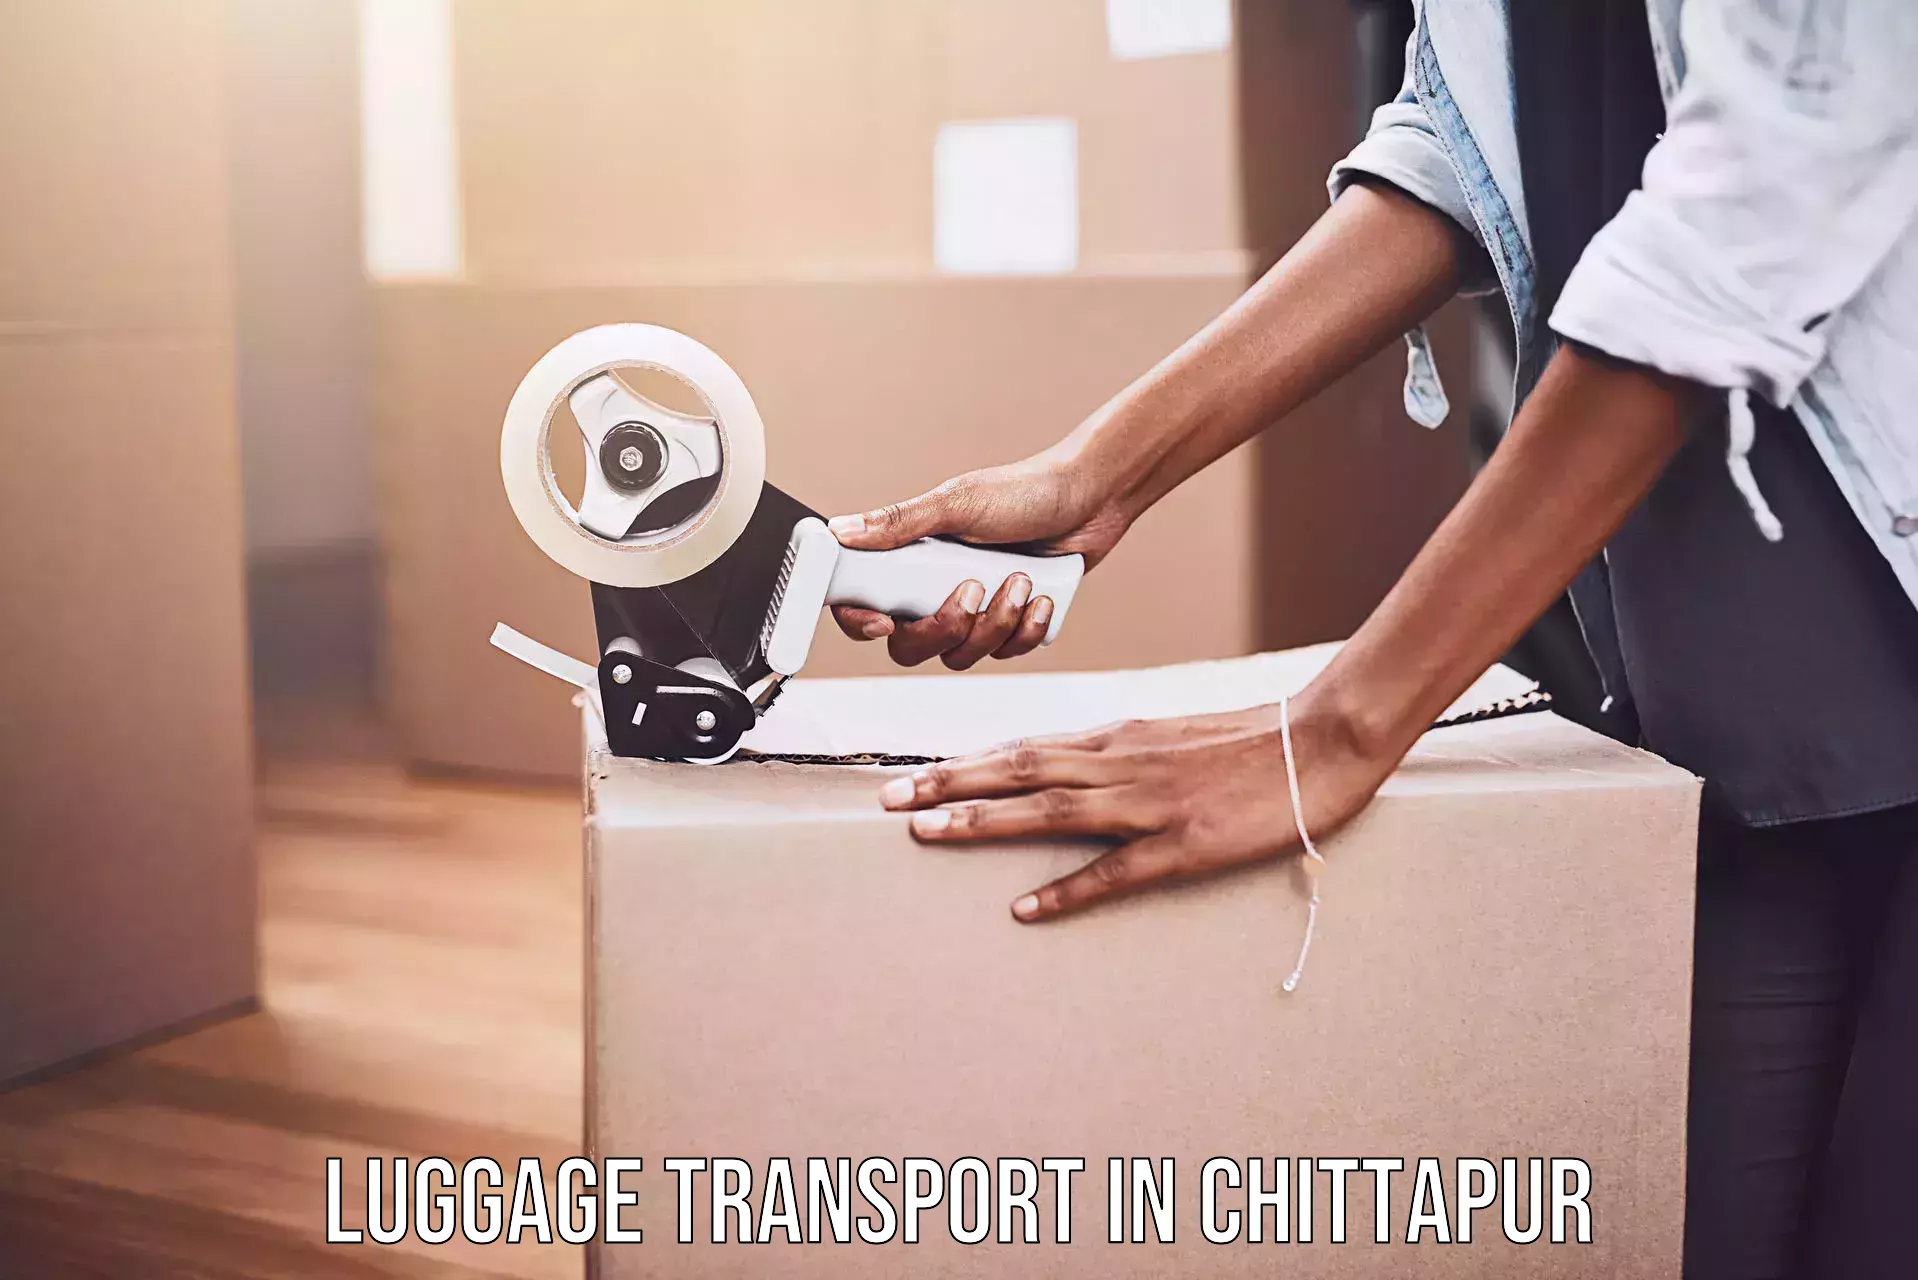 Luggage transport guidelines in Chittapur